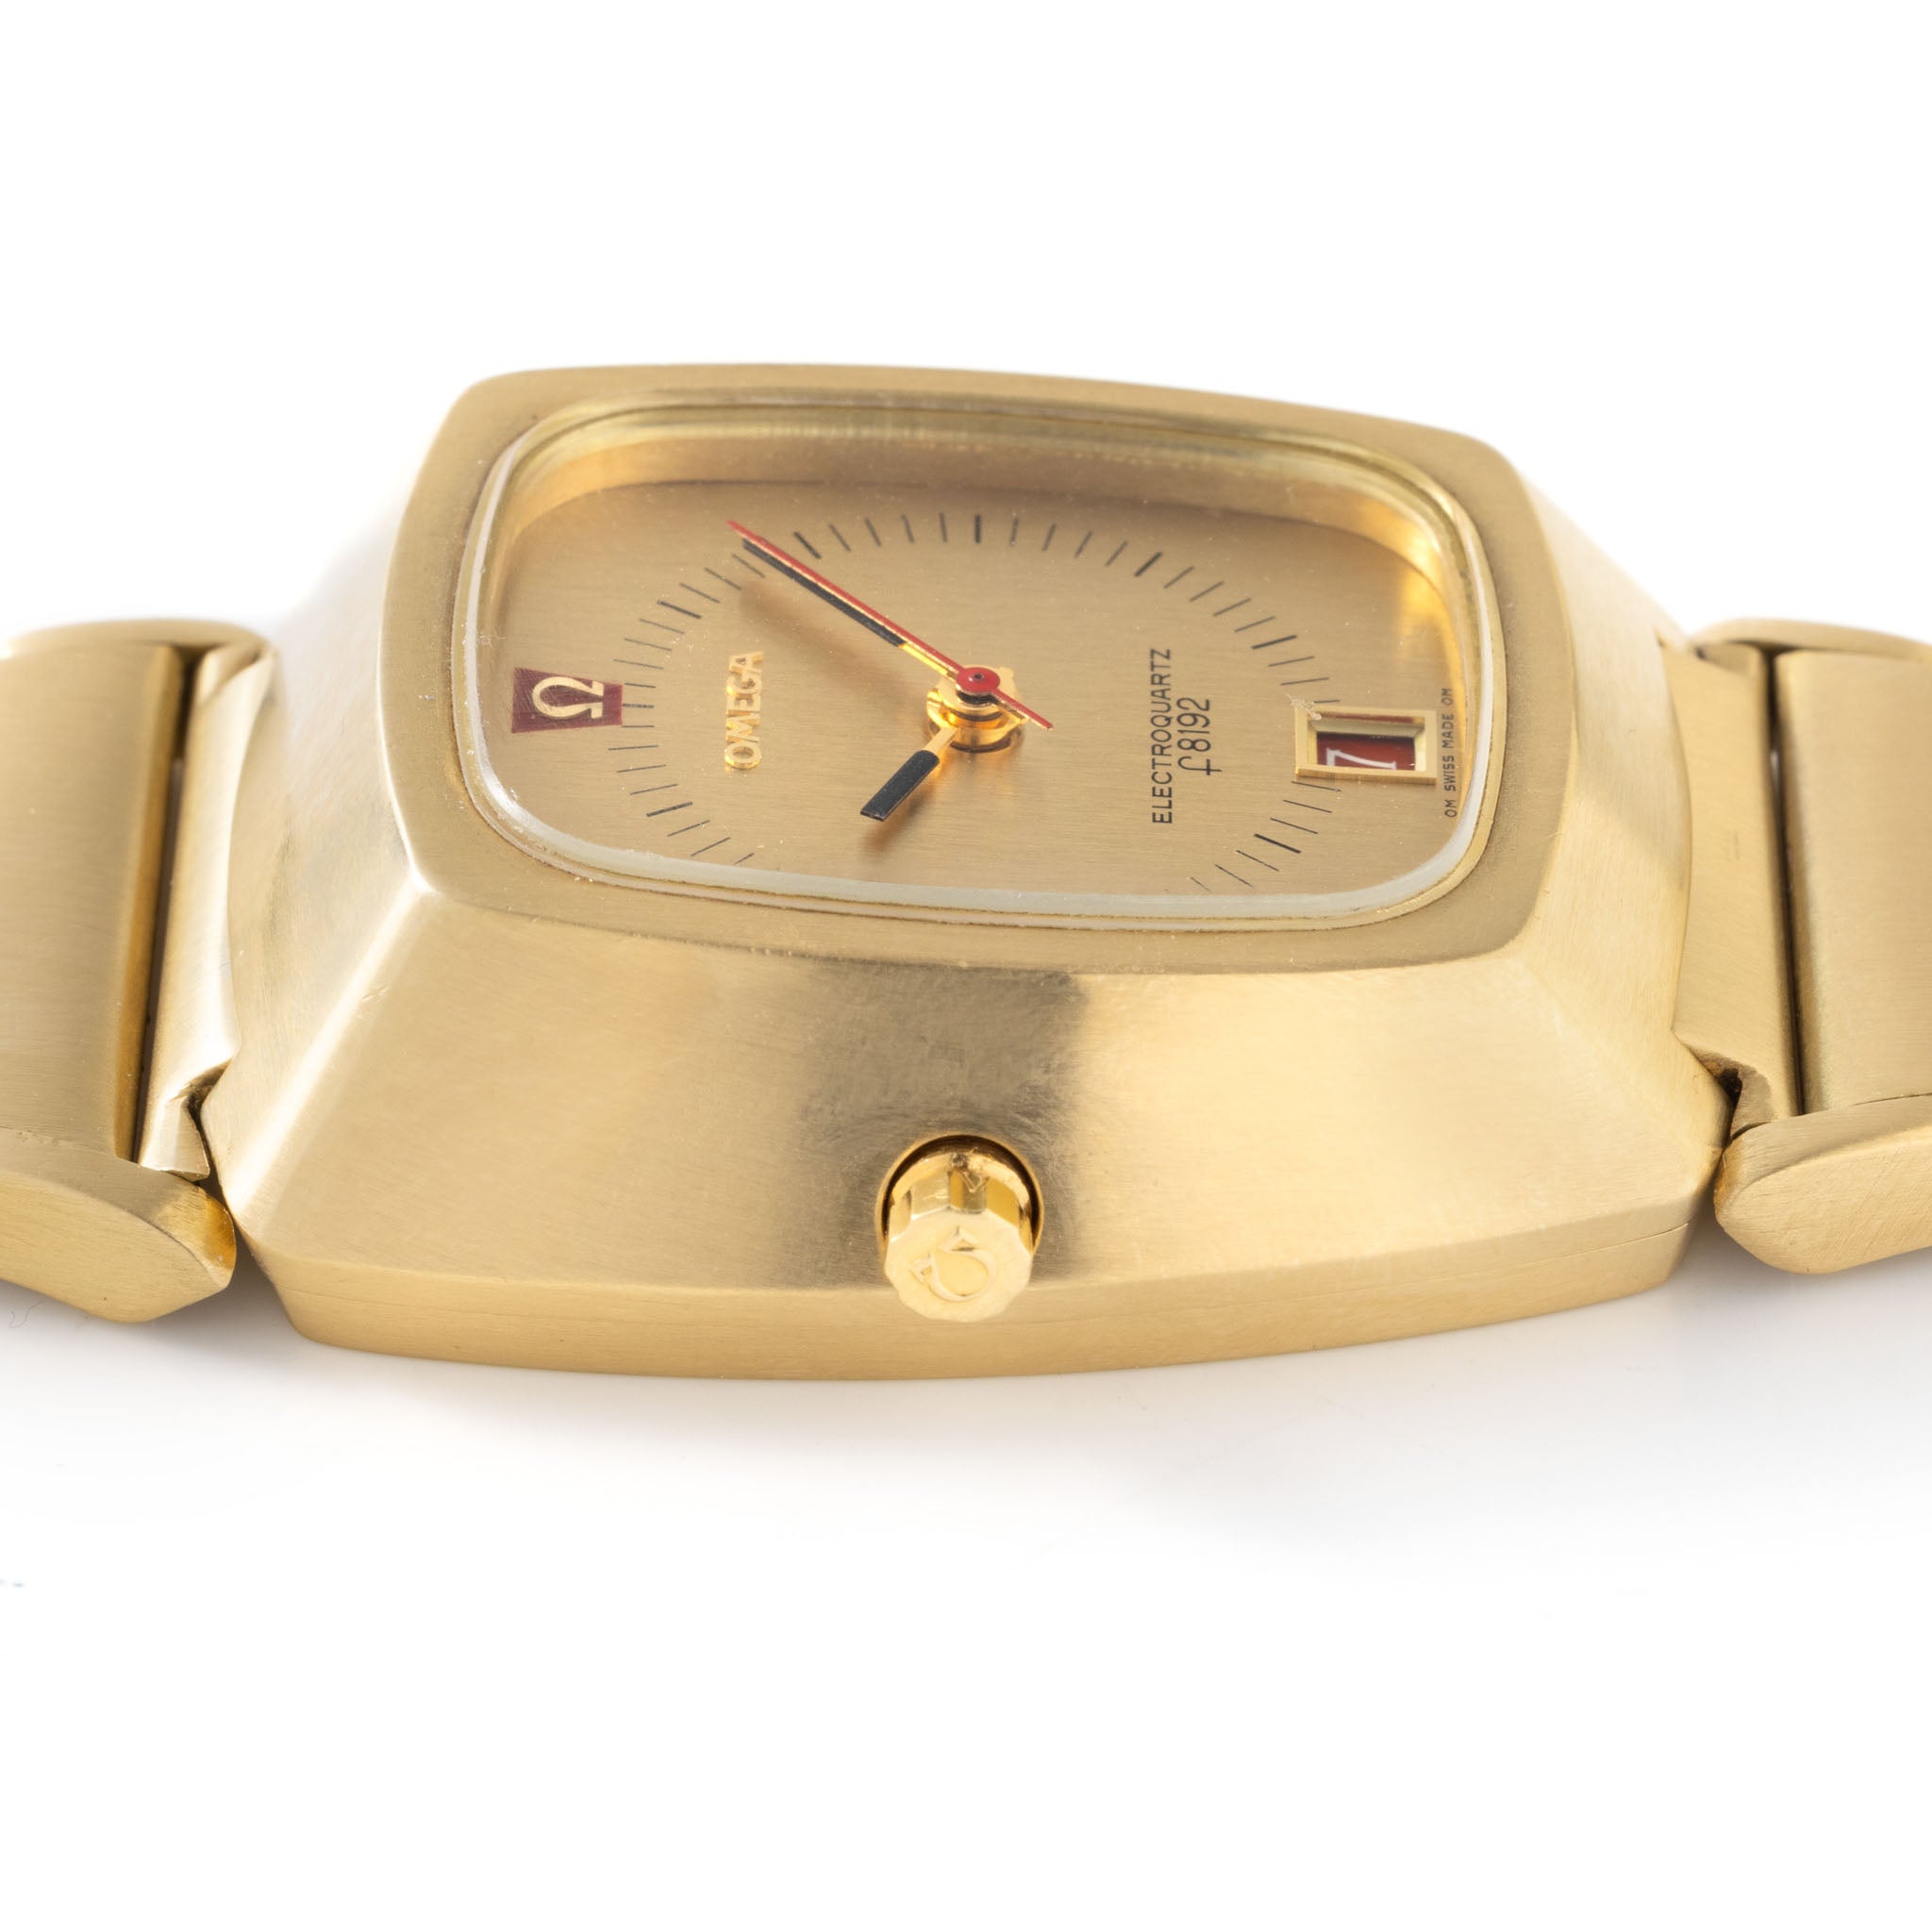 Omega Reference Beta 21 Movement in 18kt Yellow Gold